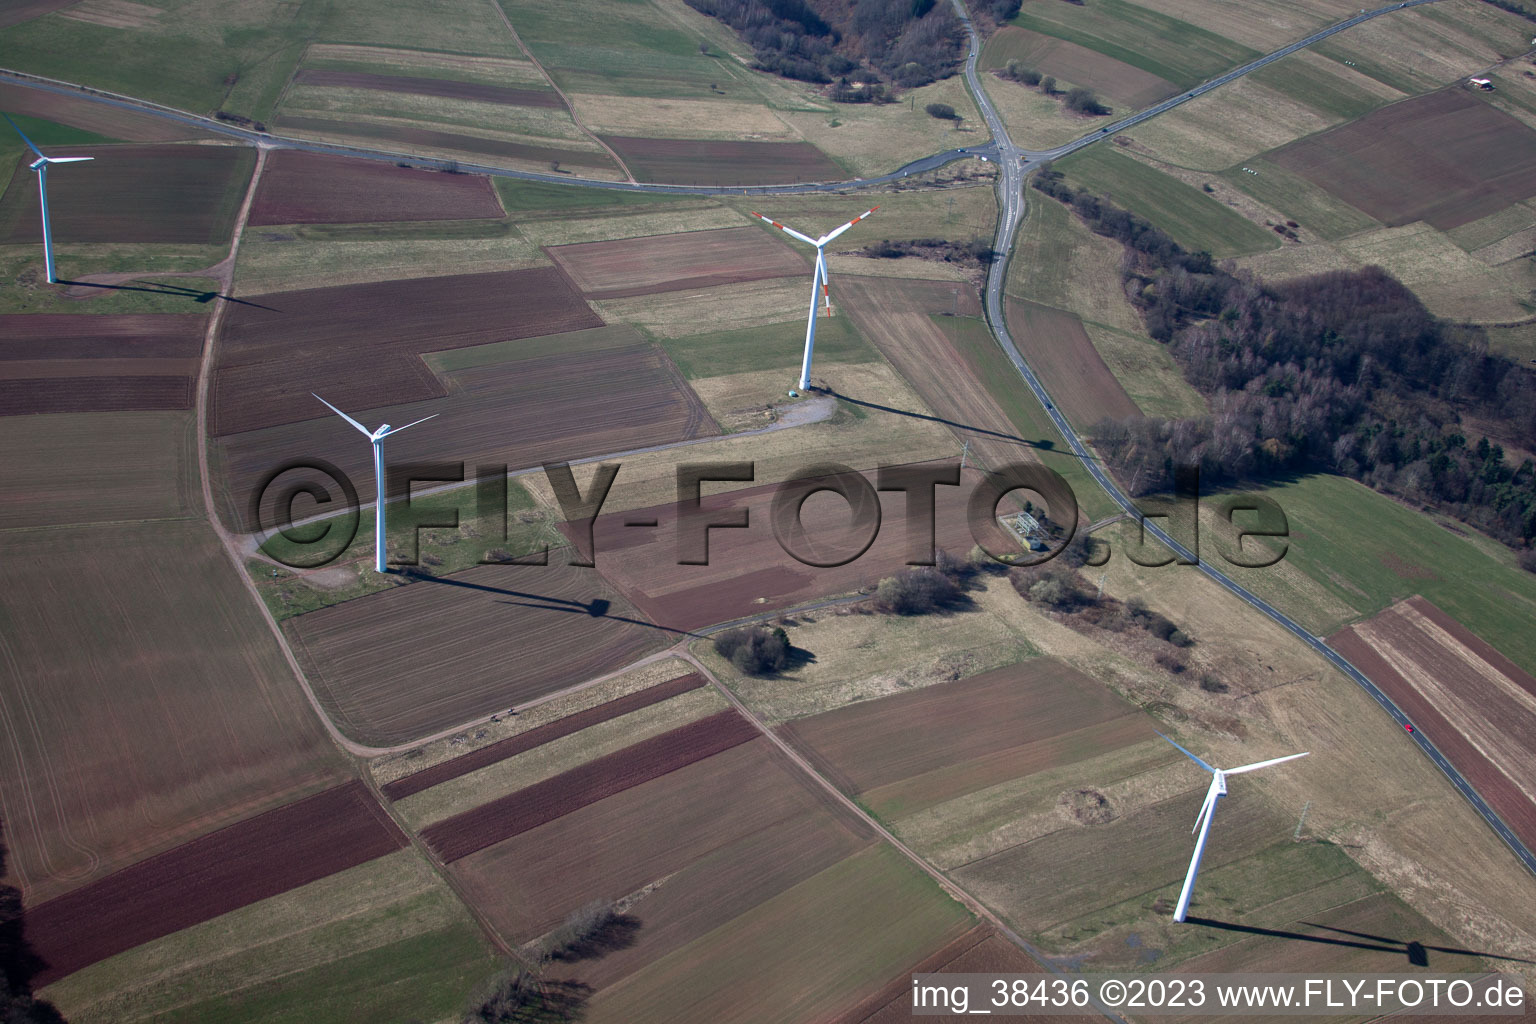 Obersimten in the state Rhineland-Palatinate, Germany from above